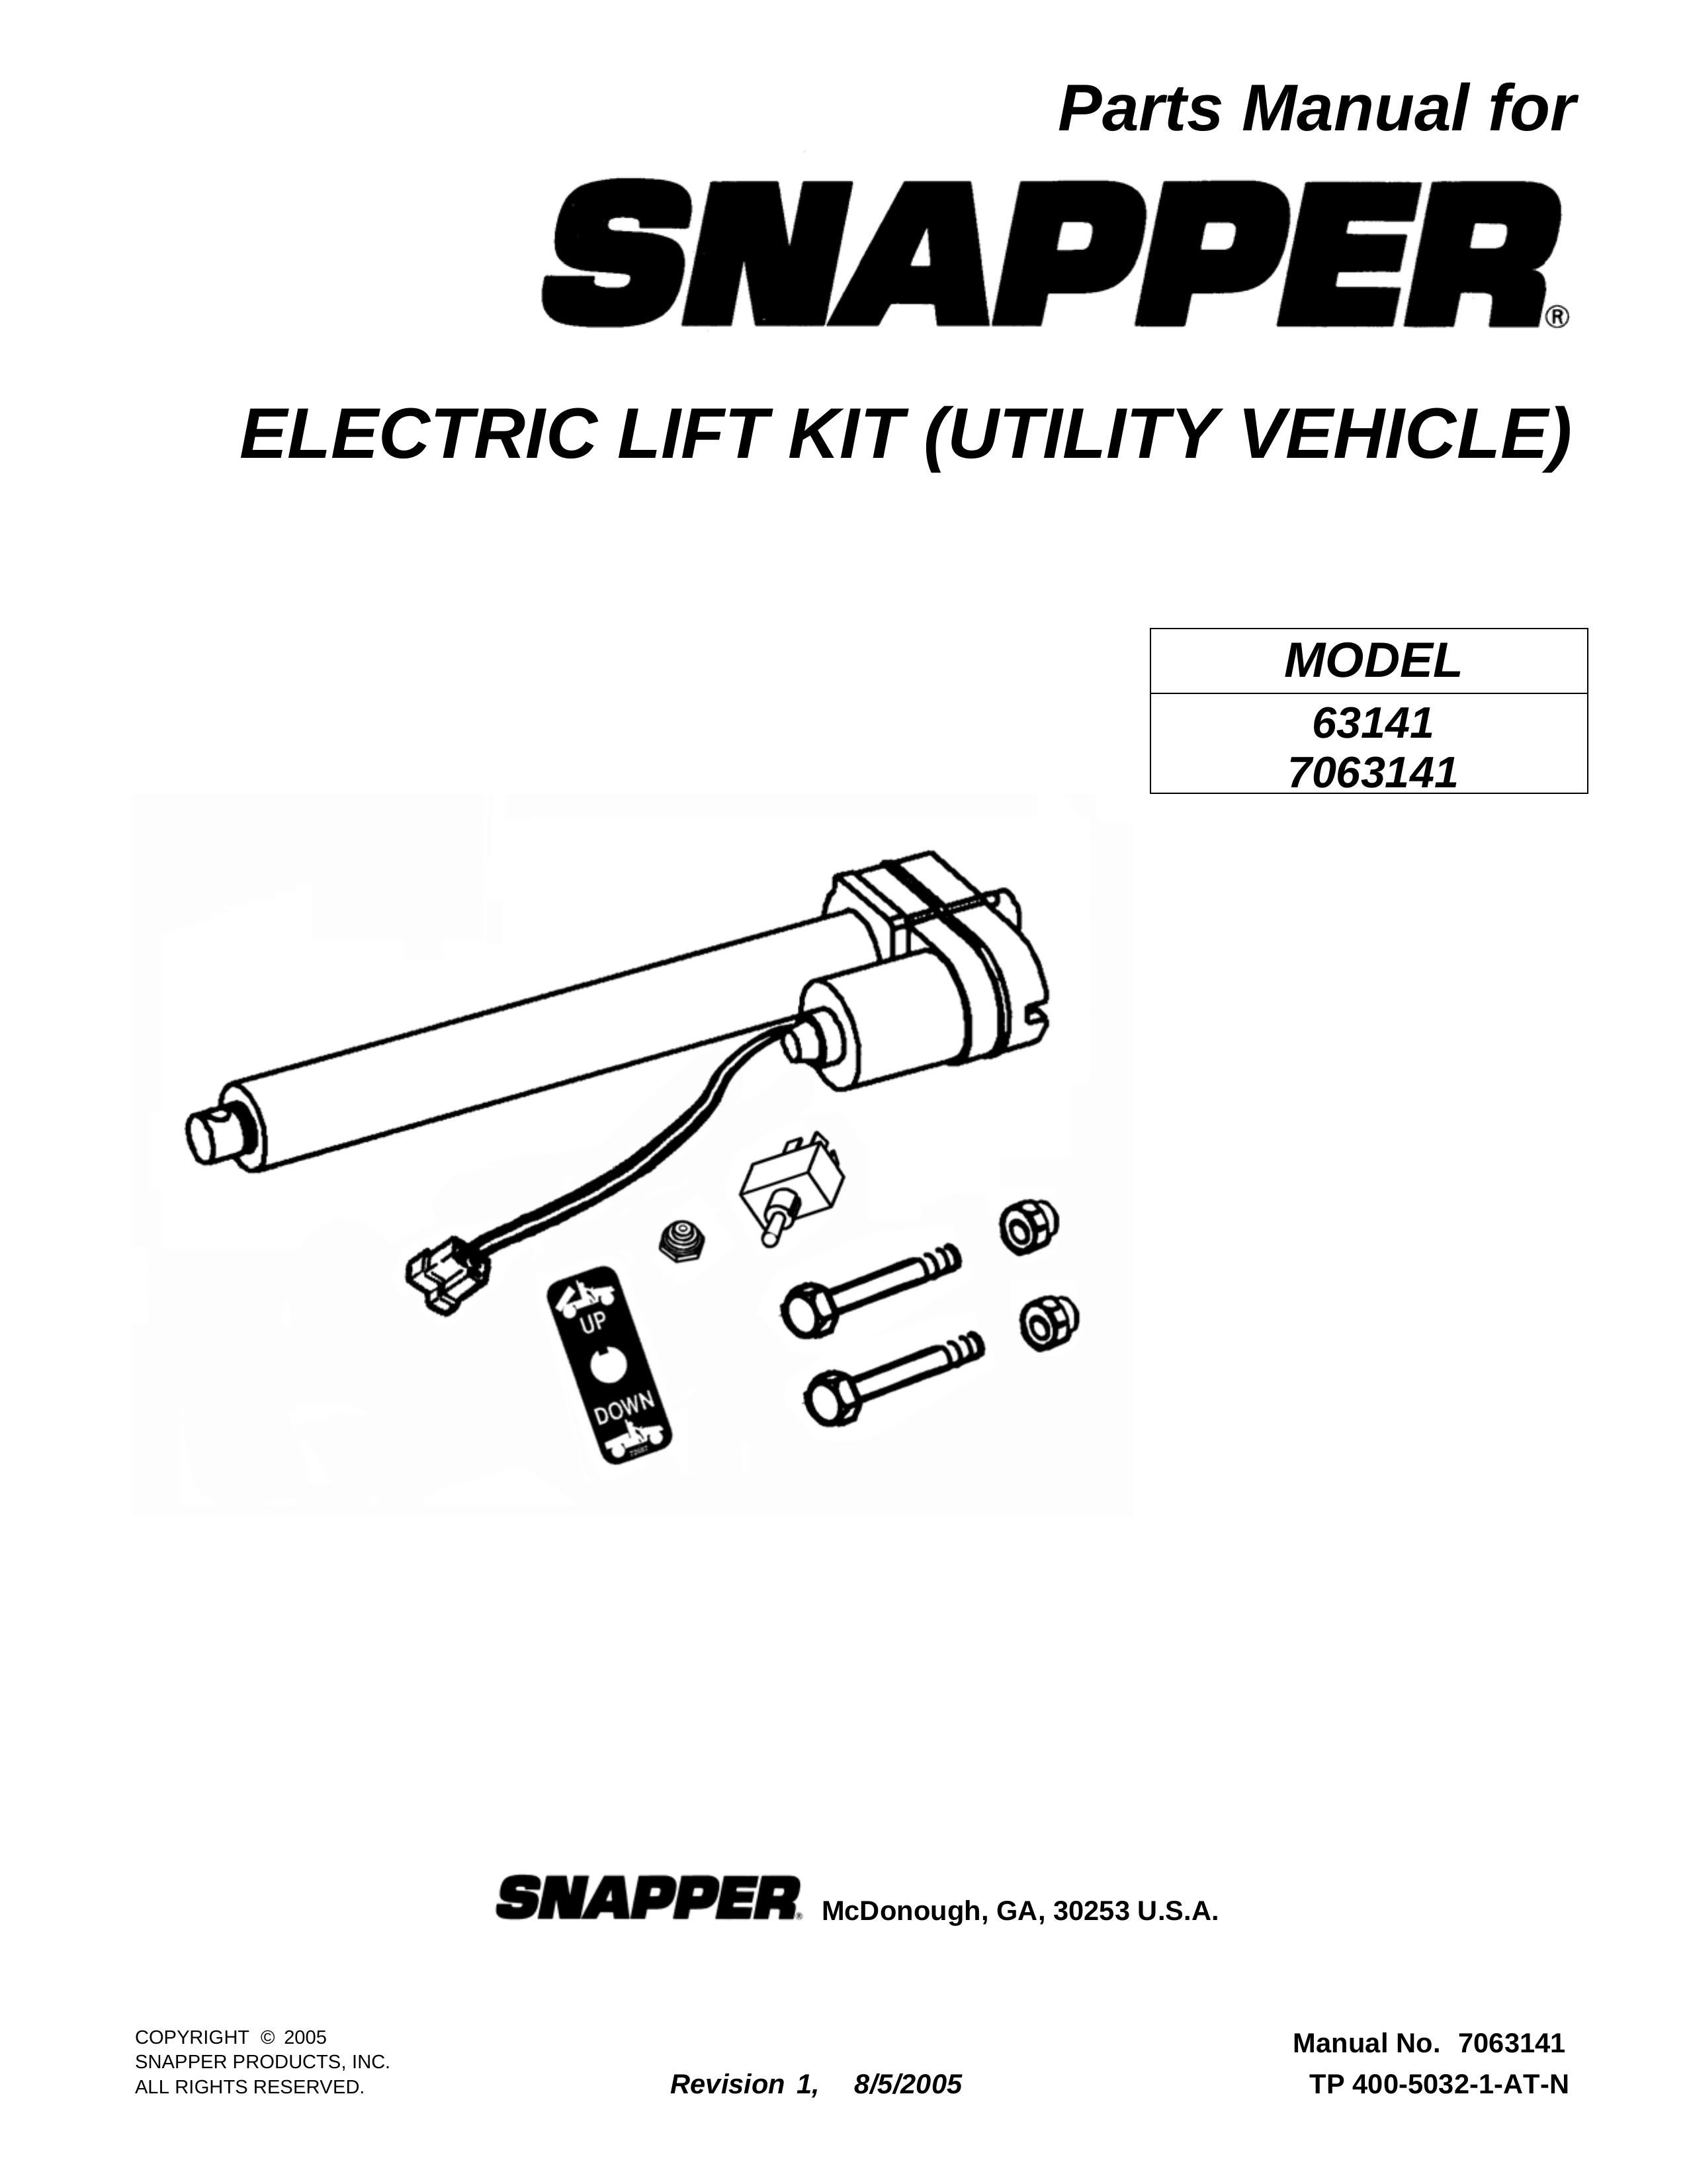 Snapper 63141 Utility Vehicle User Manual